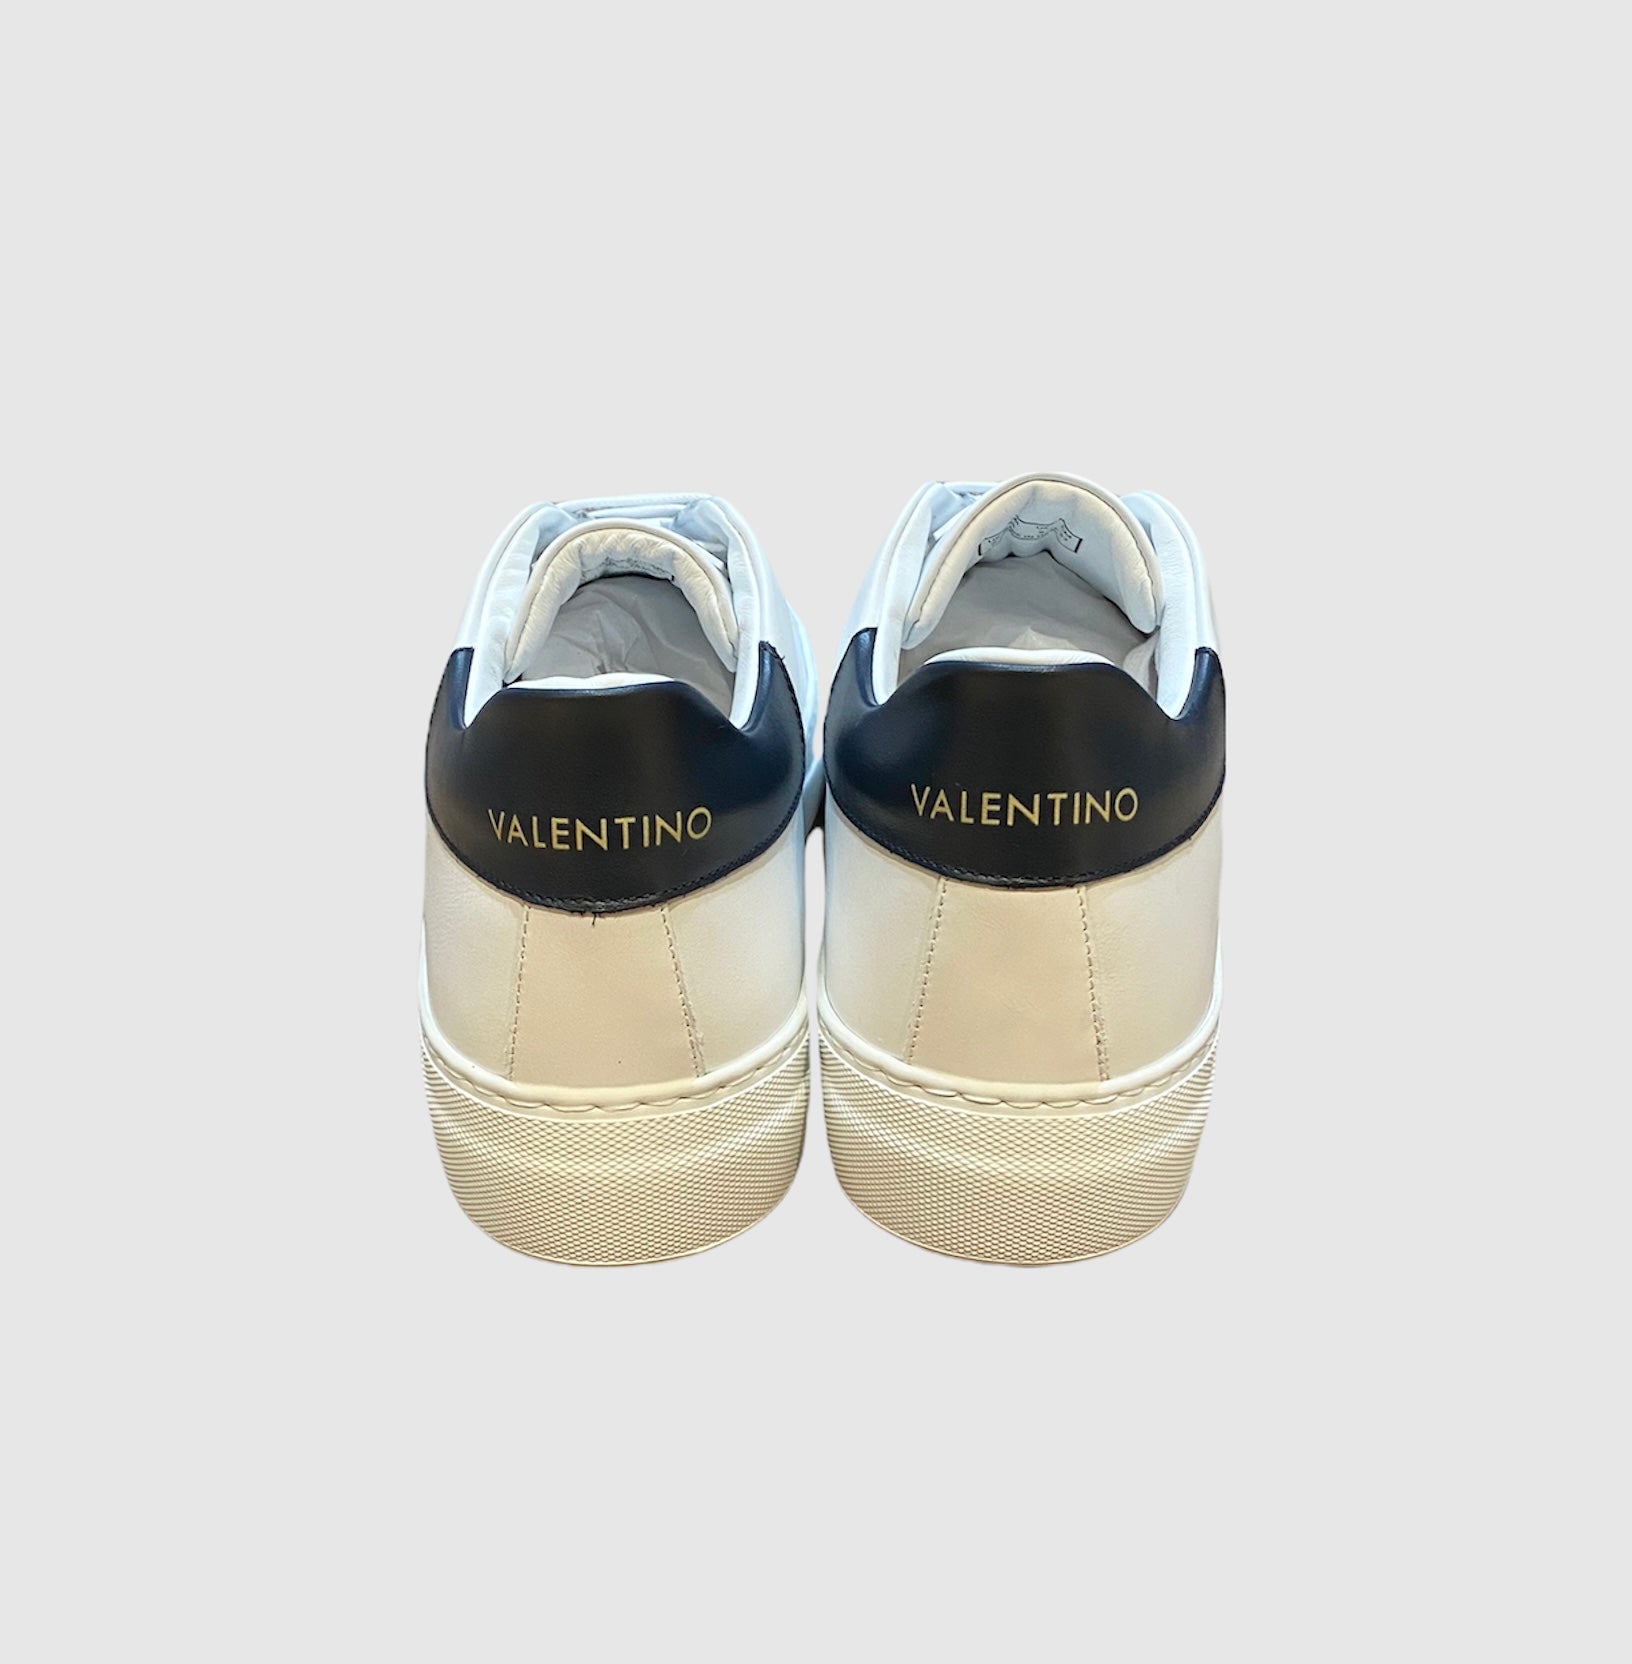 Valentino Lace Up Sneakers White/Blue